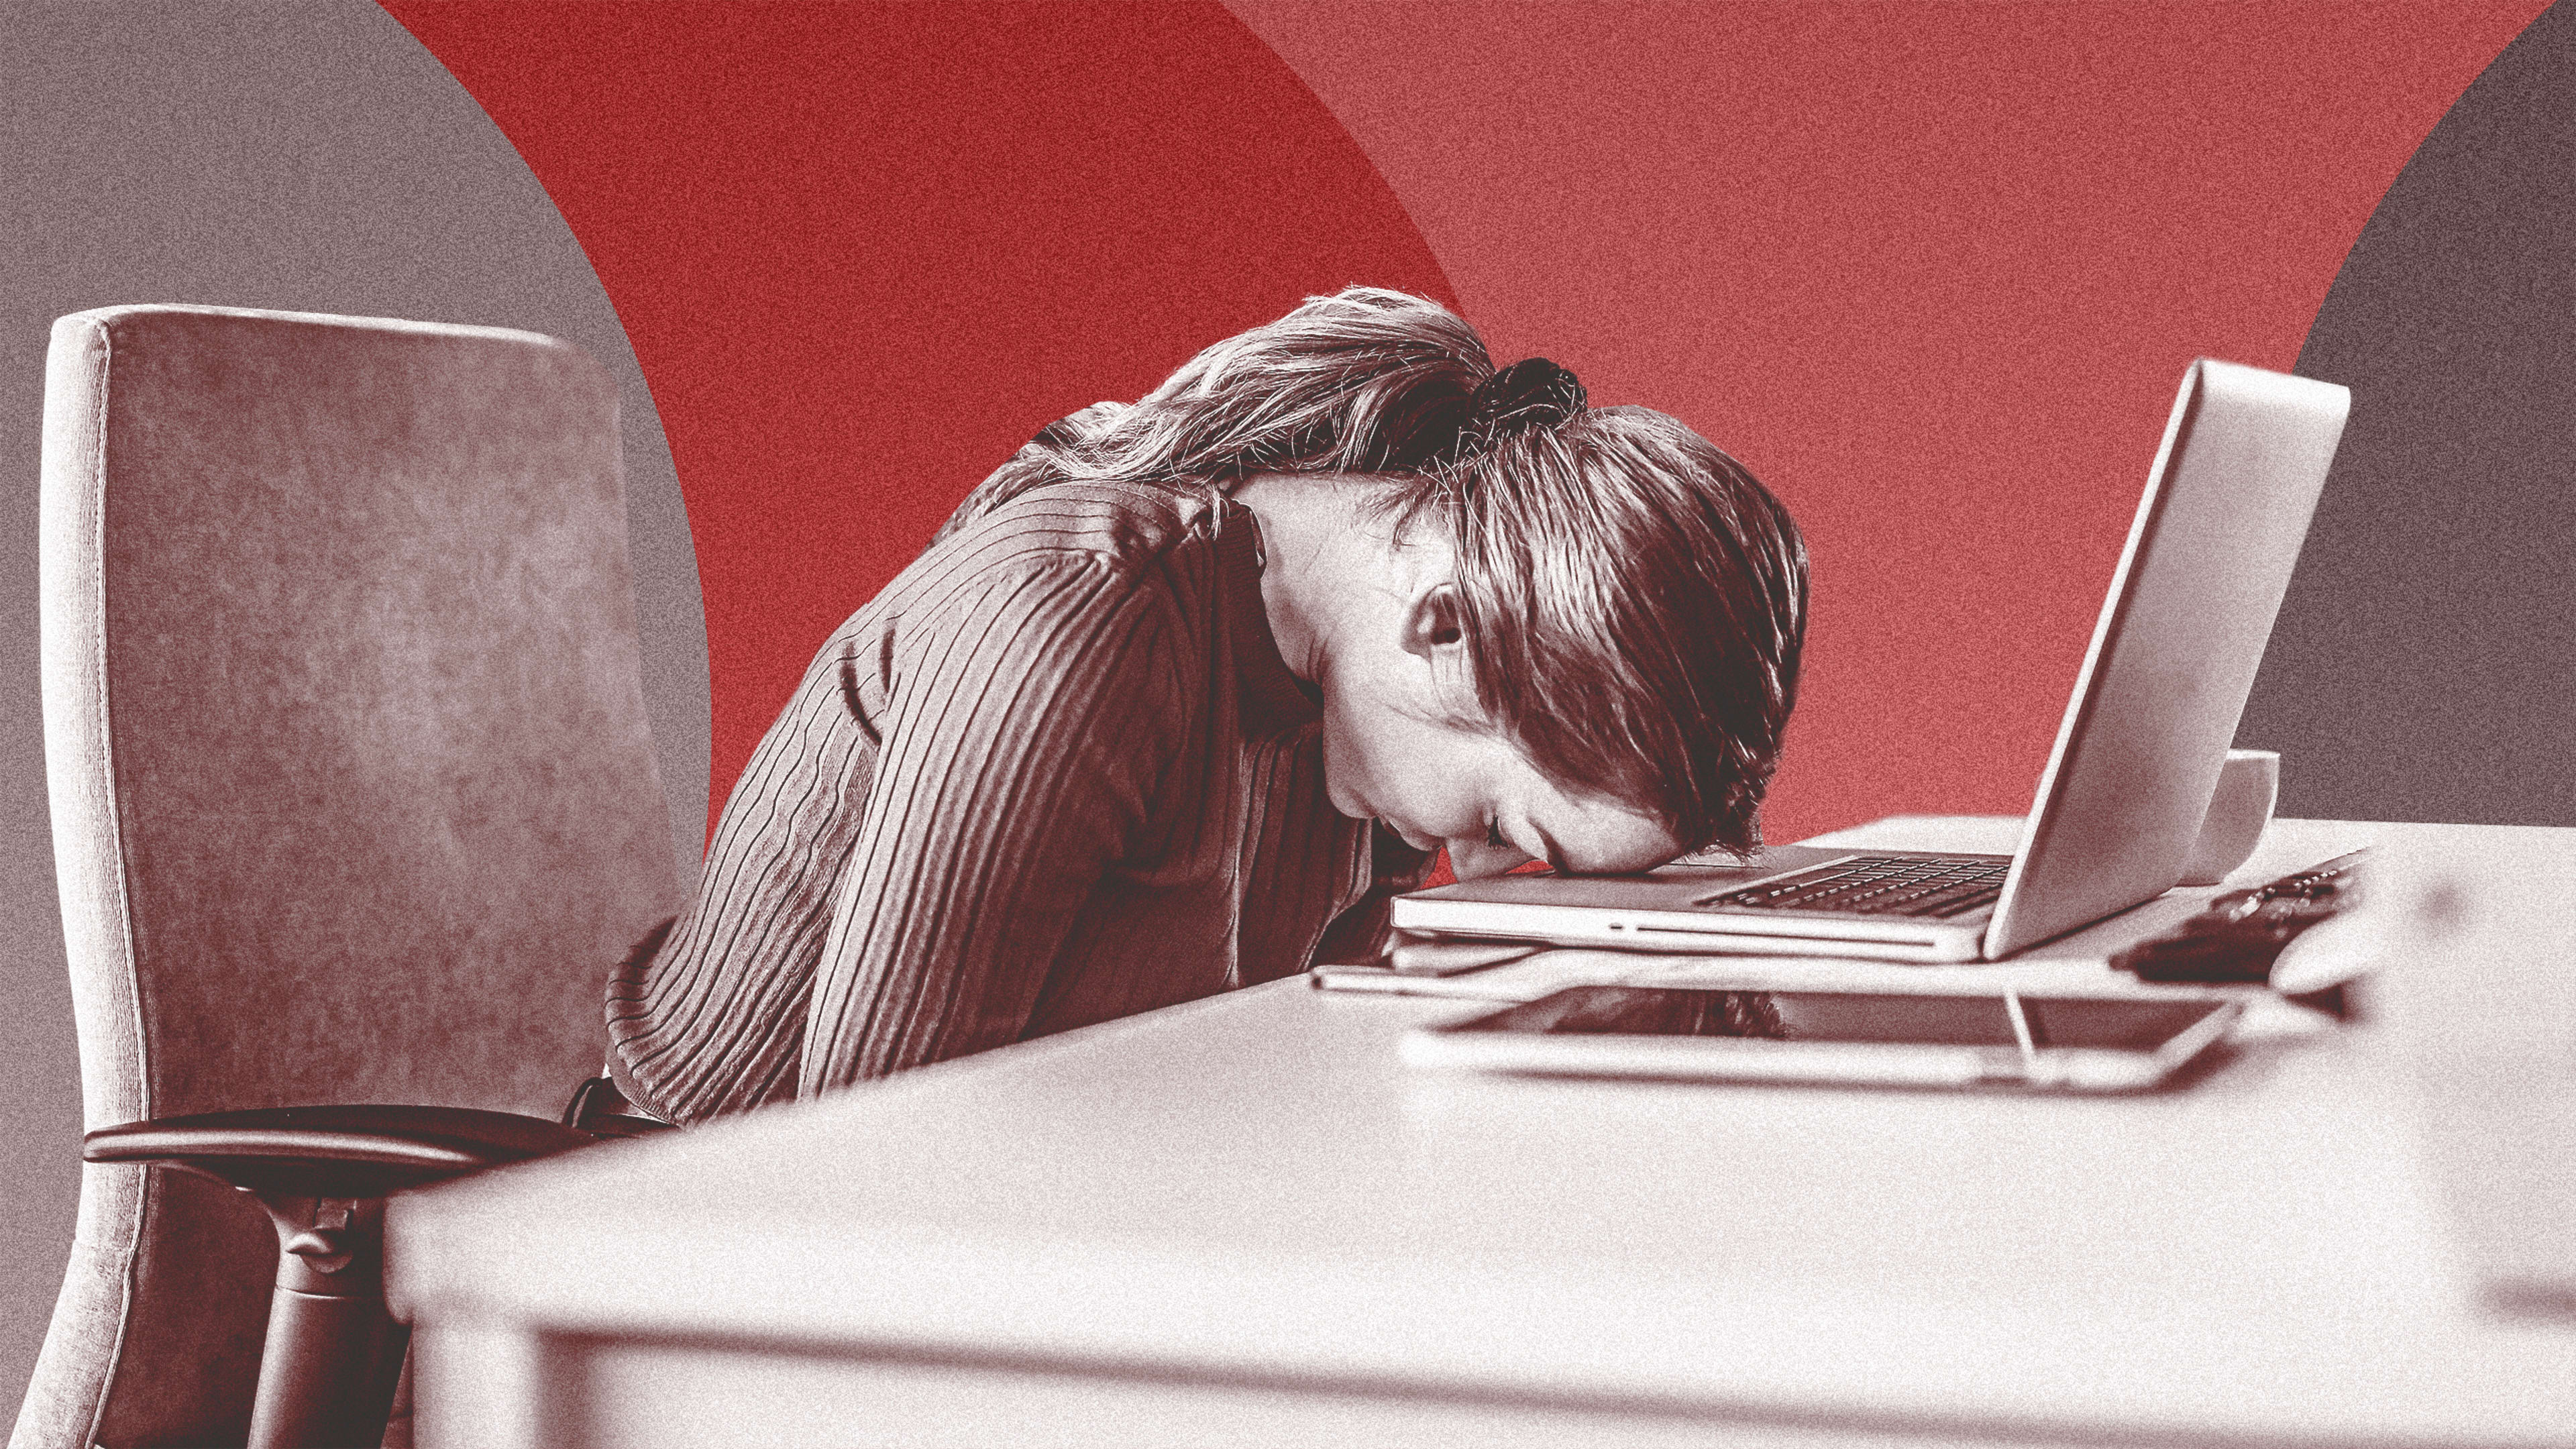 ‘Quiet quitting’ isn’t the problem. Exhausted workers are just too afraid to leave their jobs